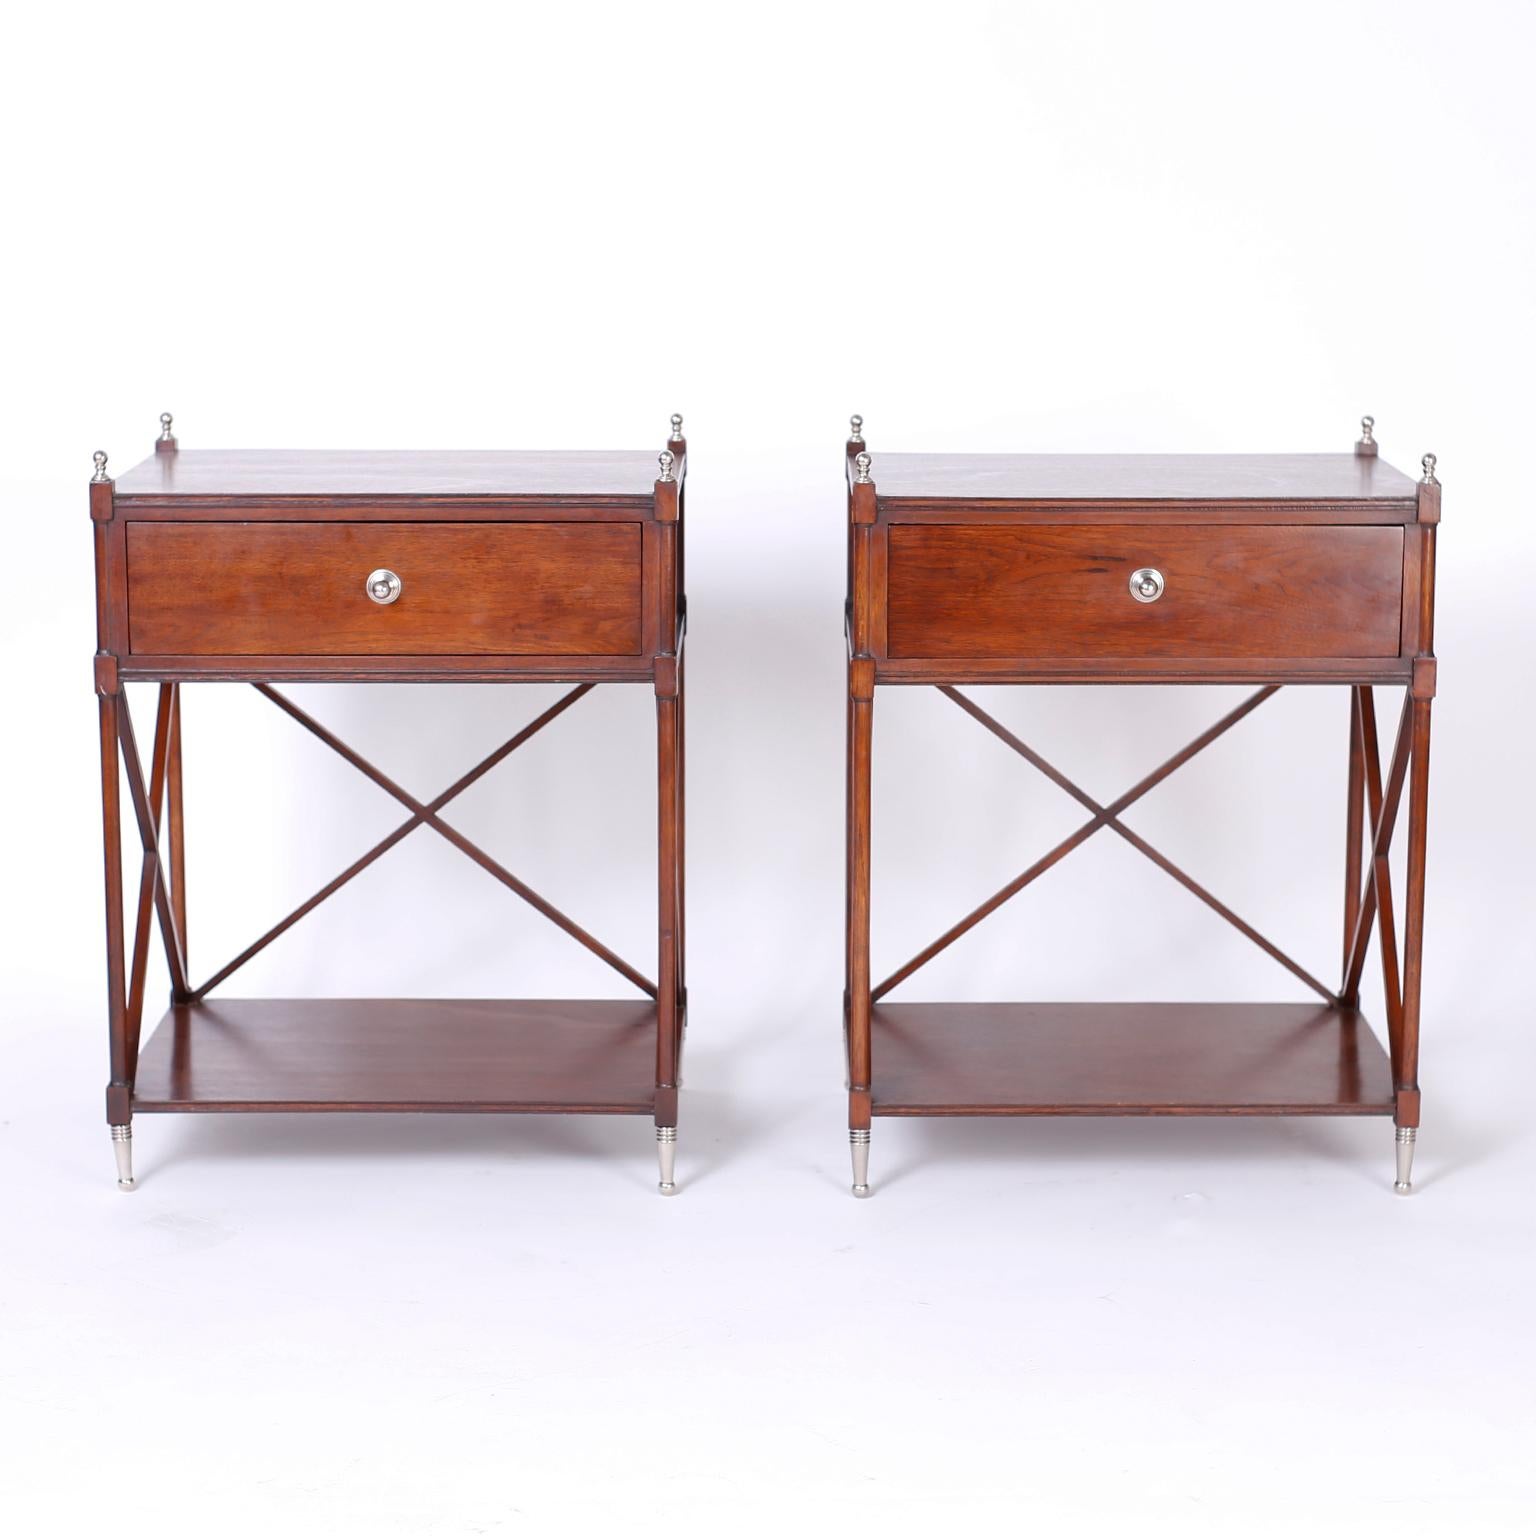 Pair of neoclassical style one-drawer stands crafted in mahogany with side and back X-supports, lower storage tier, and silvered metal finials and feet.